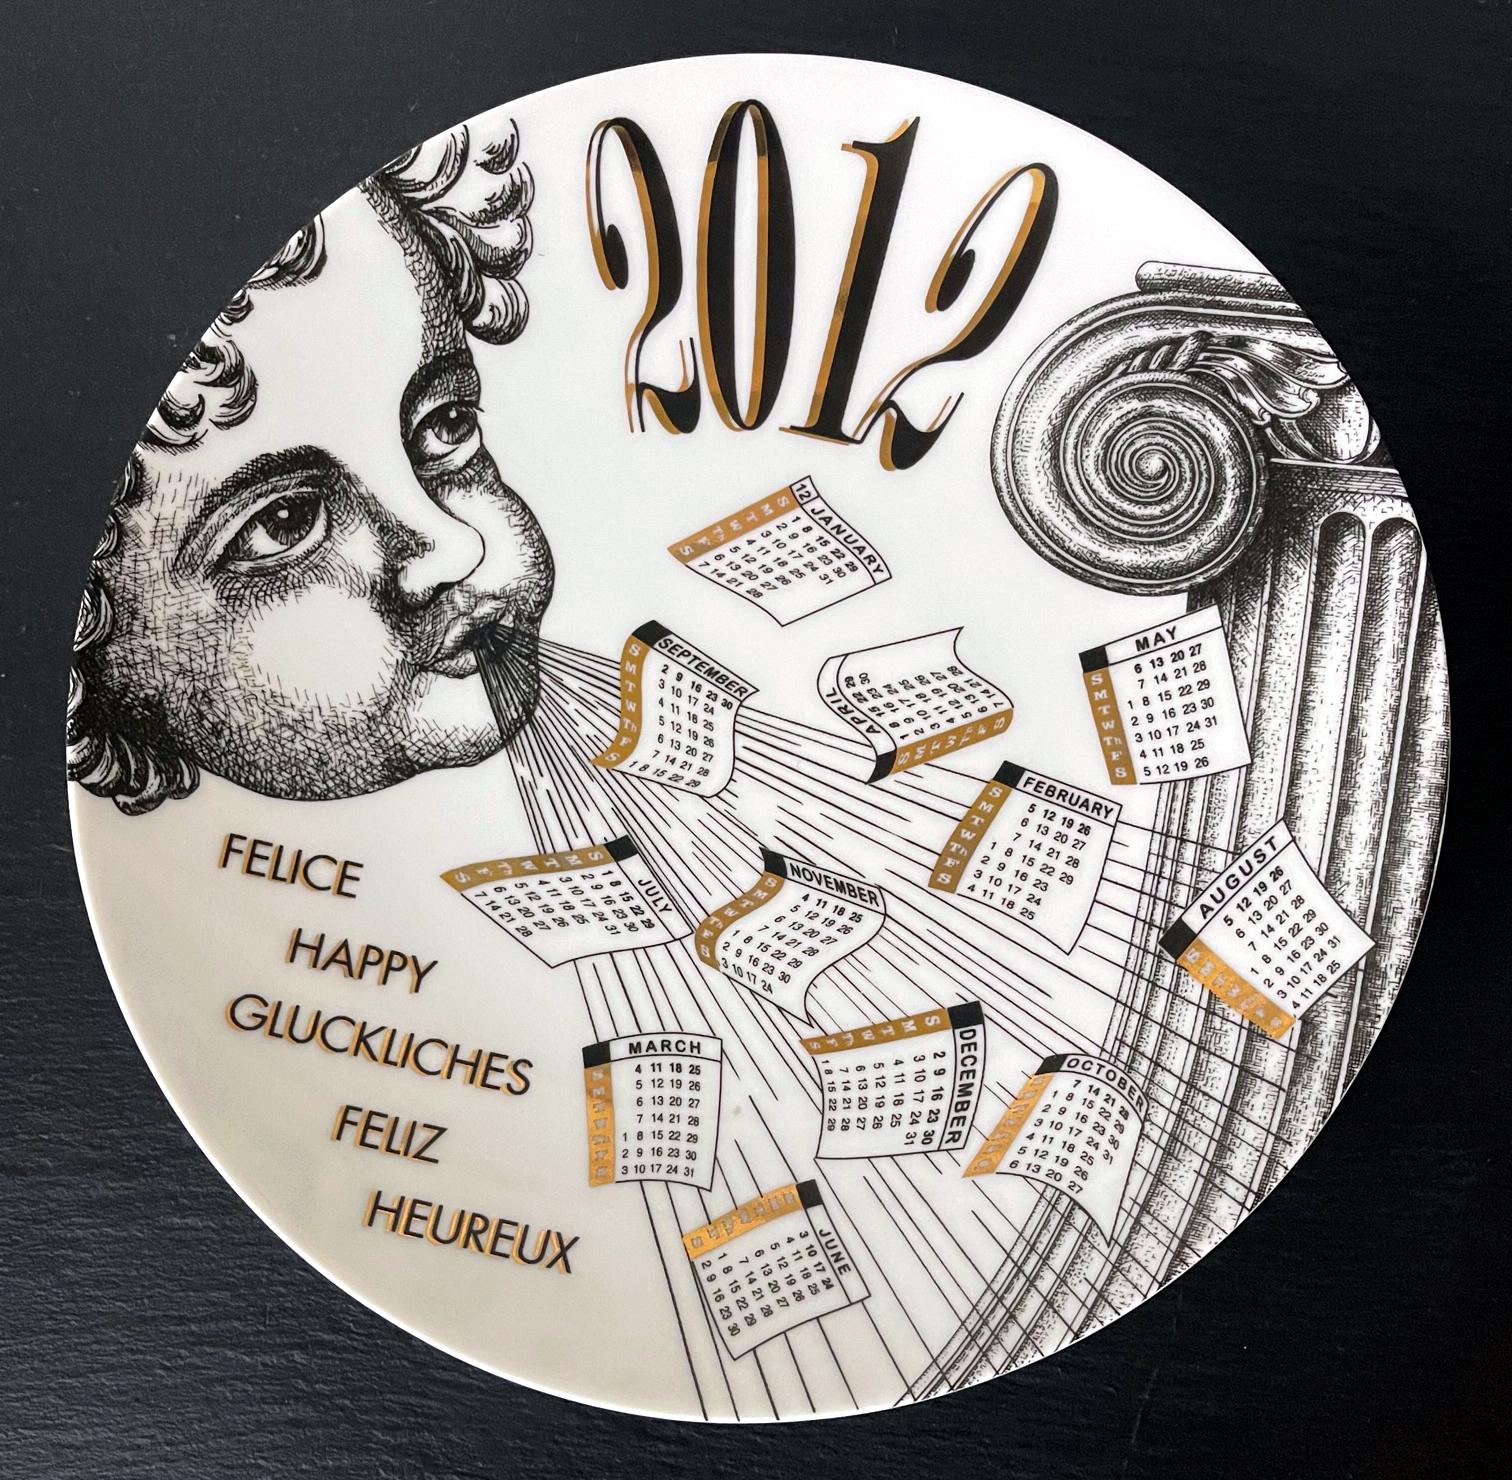 A vintage Italian decorative porcelain plate designed and made by Fornasetti. The commemorative plate is for the year of 2012 and features an angle blowing the calendar pieces. The plate was made in a limited edition of 81 out of 700. The back has